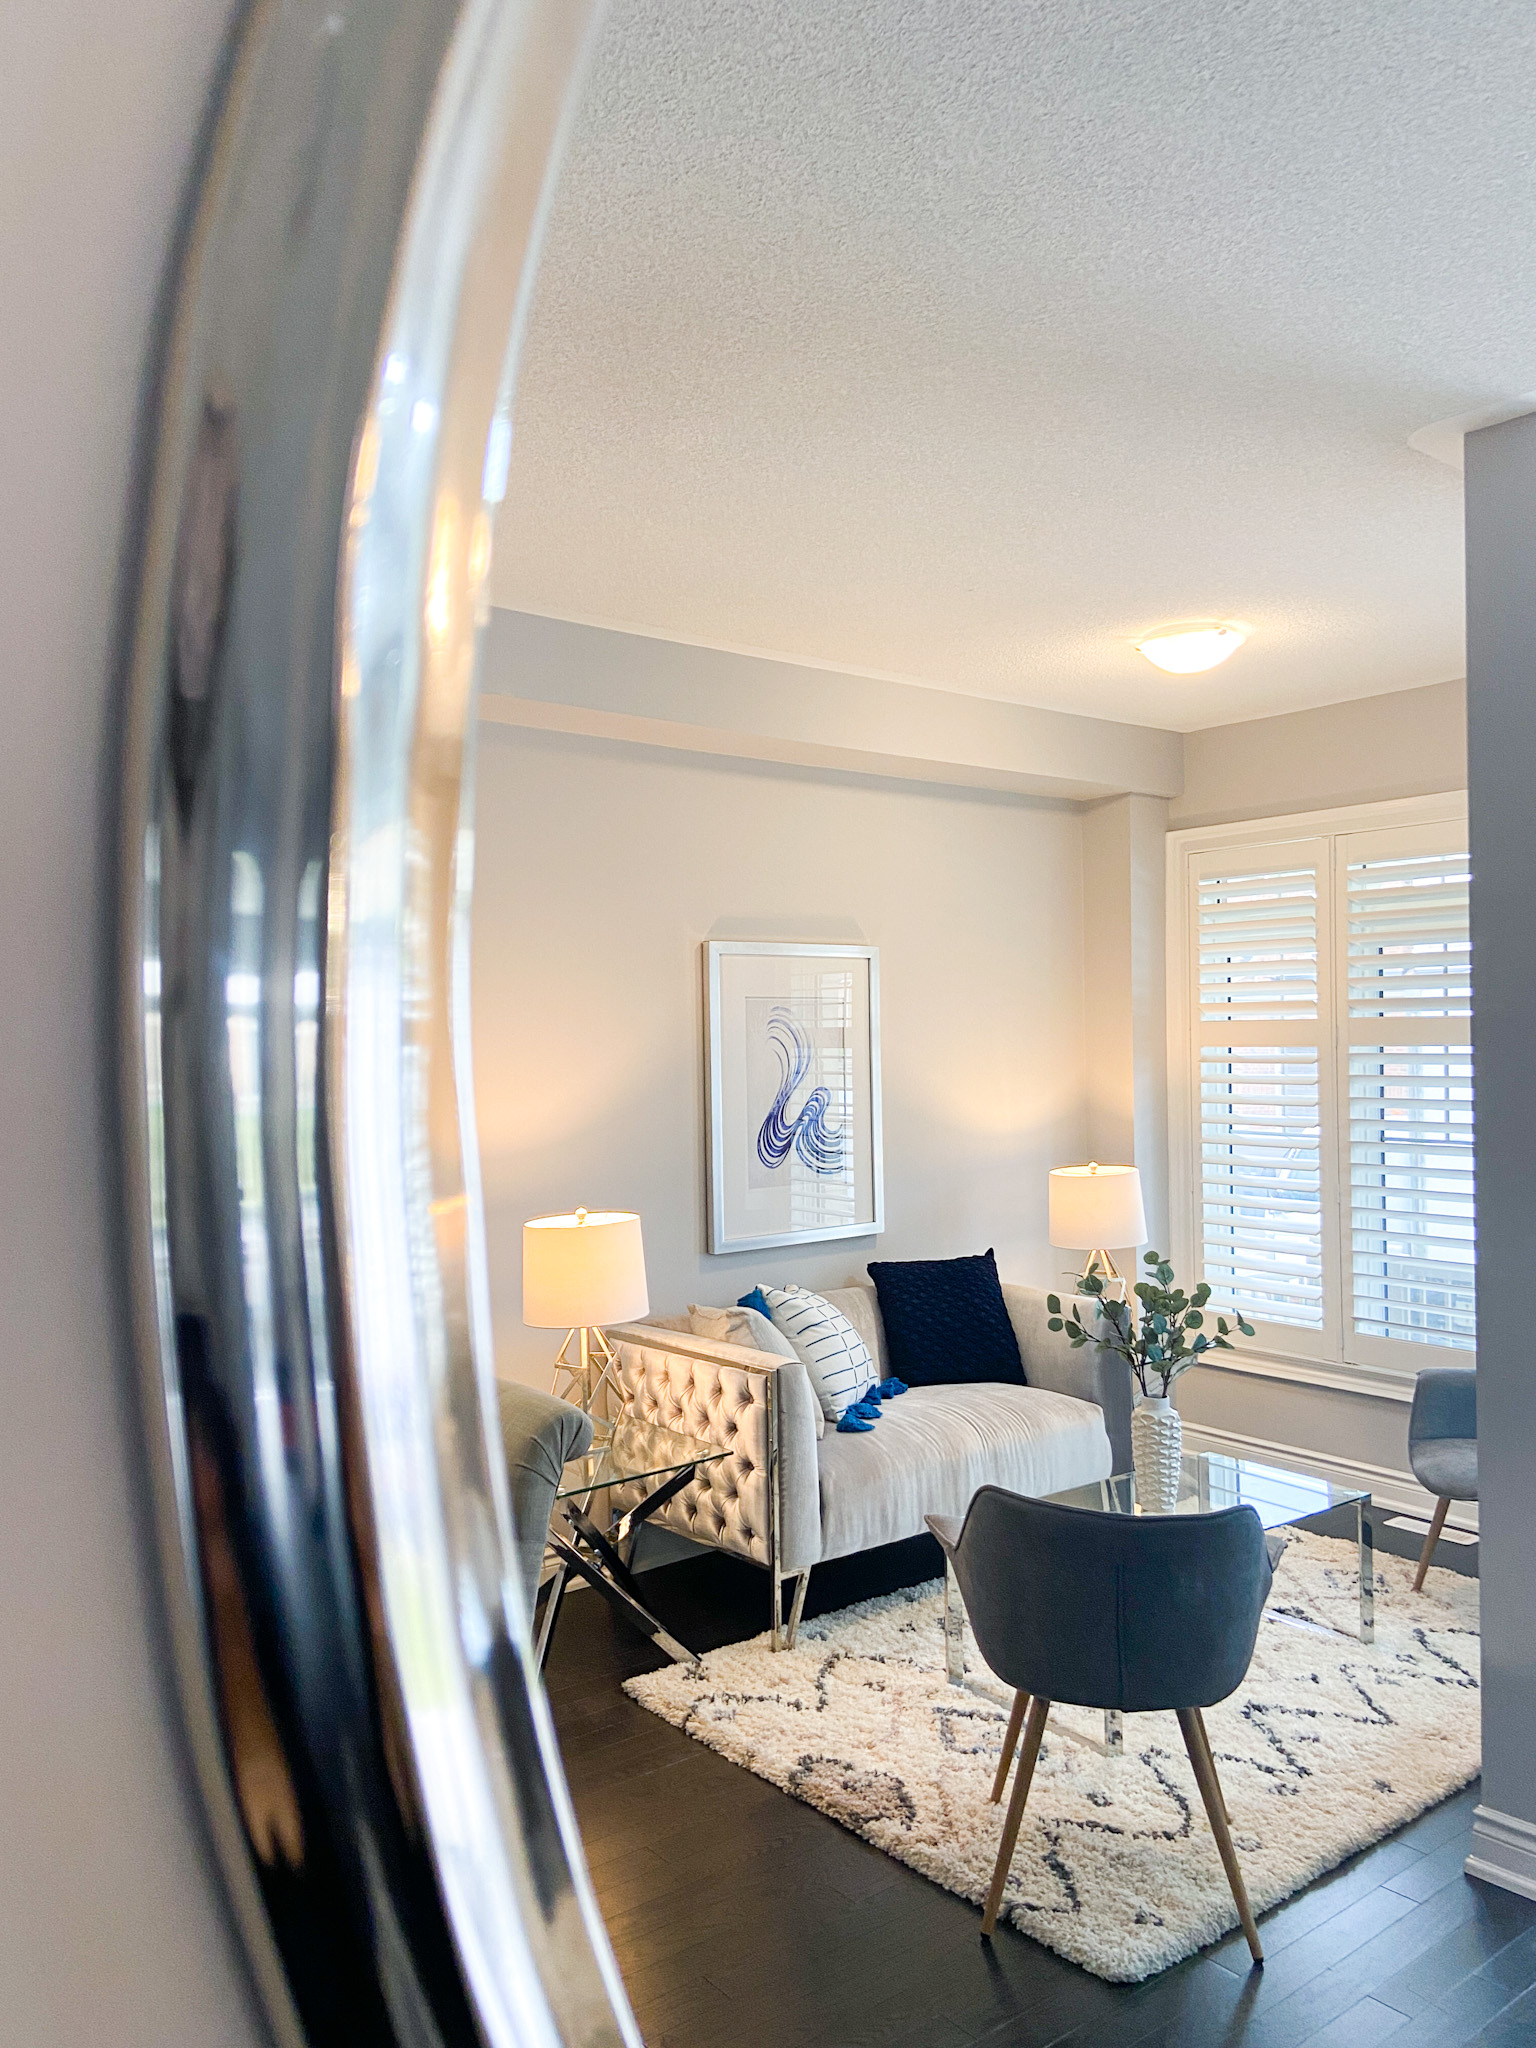 Living room with white furnitures, silver nightstands and blue decor staged by StyleBite Staging consultant for a sale in Toronto